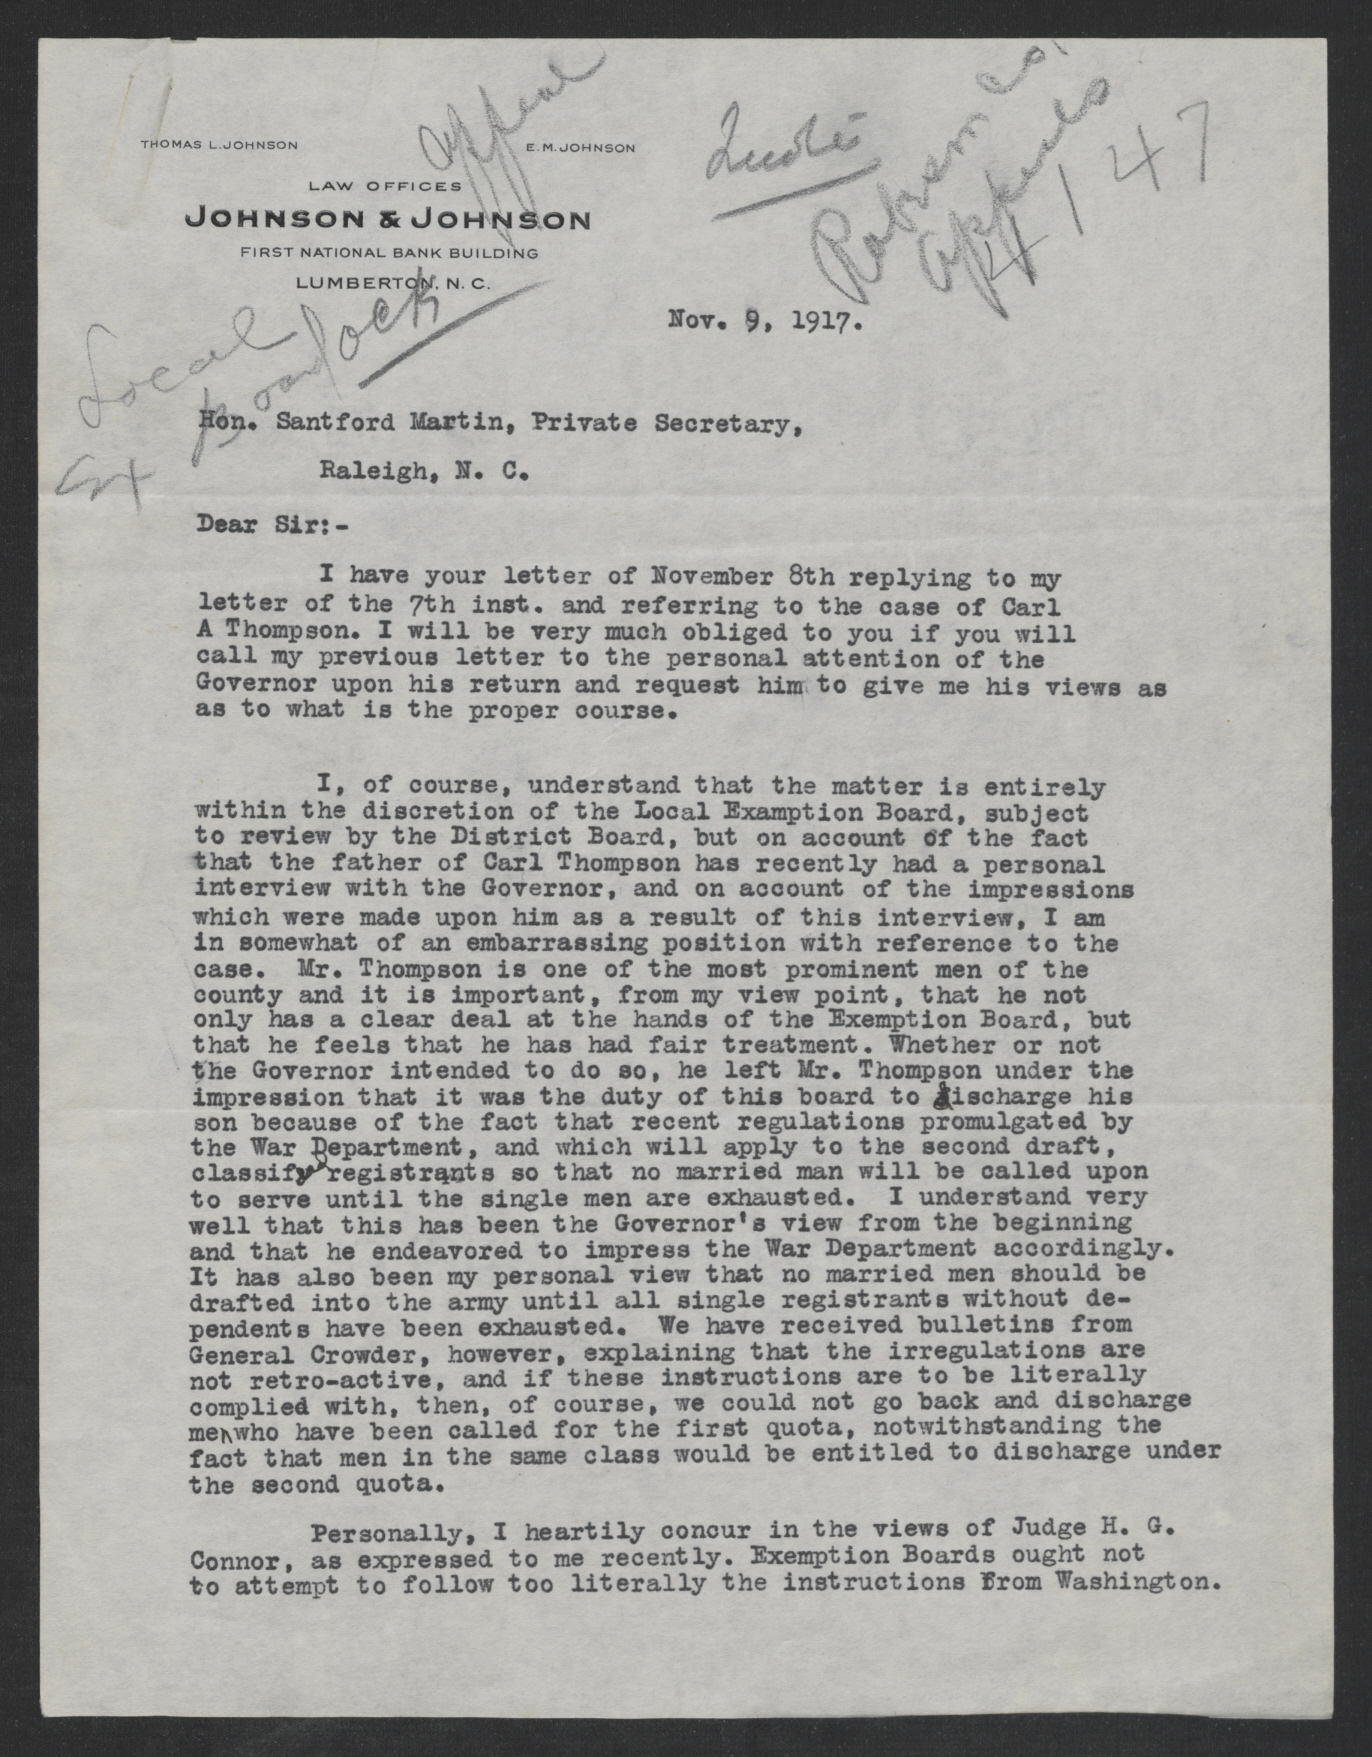 Letter from Thomas L. Johnson to Santford Martin, November 9, 1917, page 1